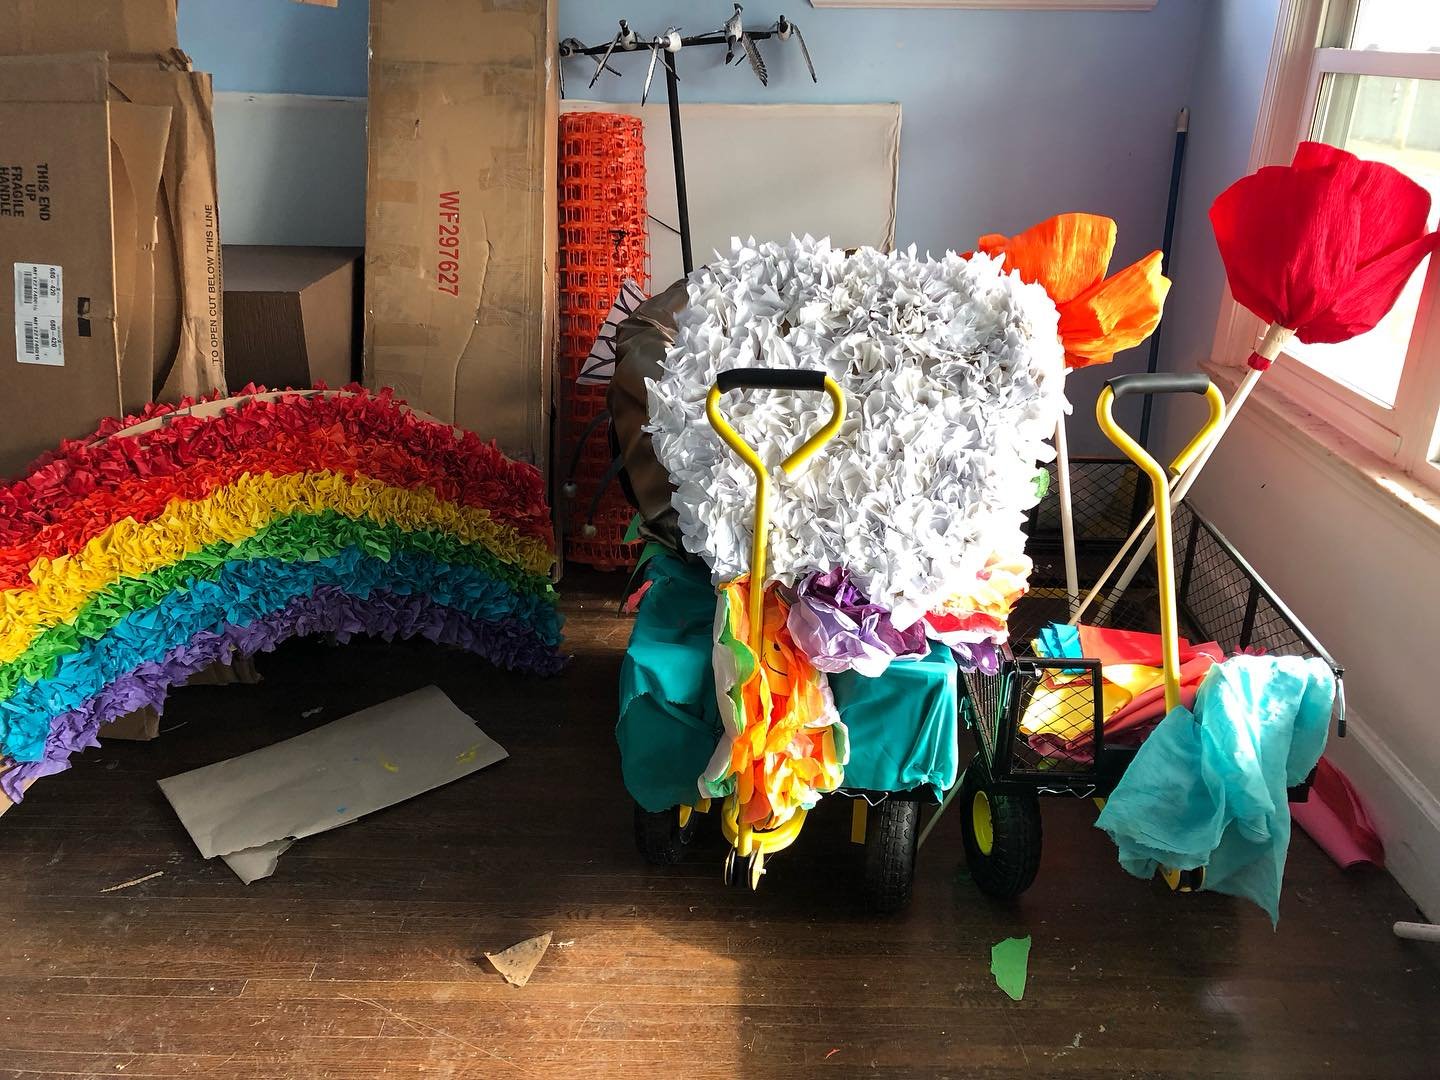 As always, grateful for our community, the people around us, the opportunity to be here, the time to share it with you.  Float puppets by Lindsay McCaw and Vanessa Henschel for upcoming mini Mardi Gras parades at All Seasons Senior Living Communities